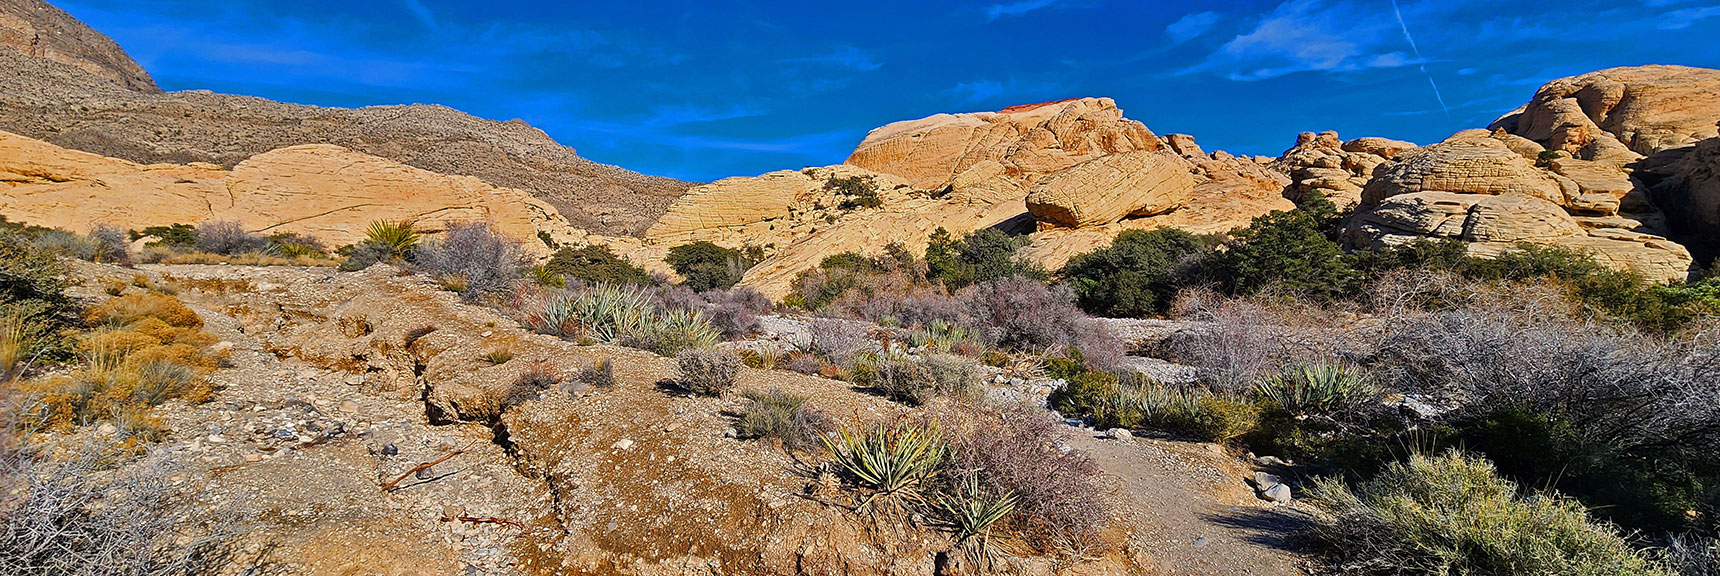 Rounding the Ridgeline, Now Heading to the Sandstone Quarry Trailhead Area | Upper Calico Hills Loop | Calico Basin and Red Rock Canyon, Nevada